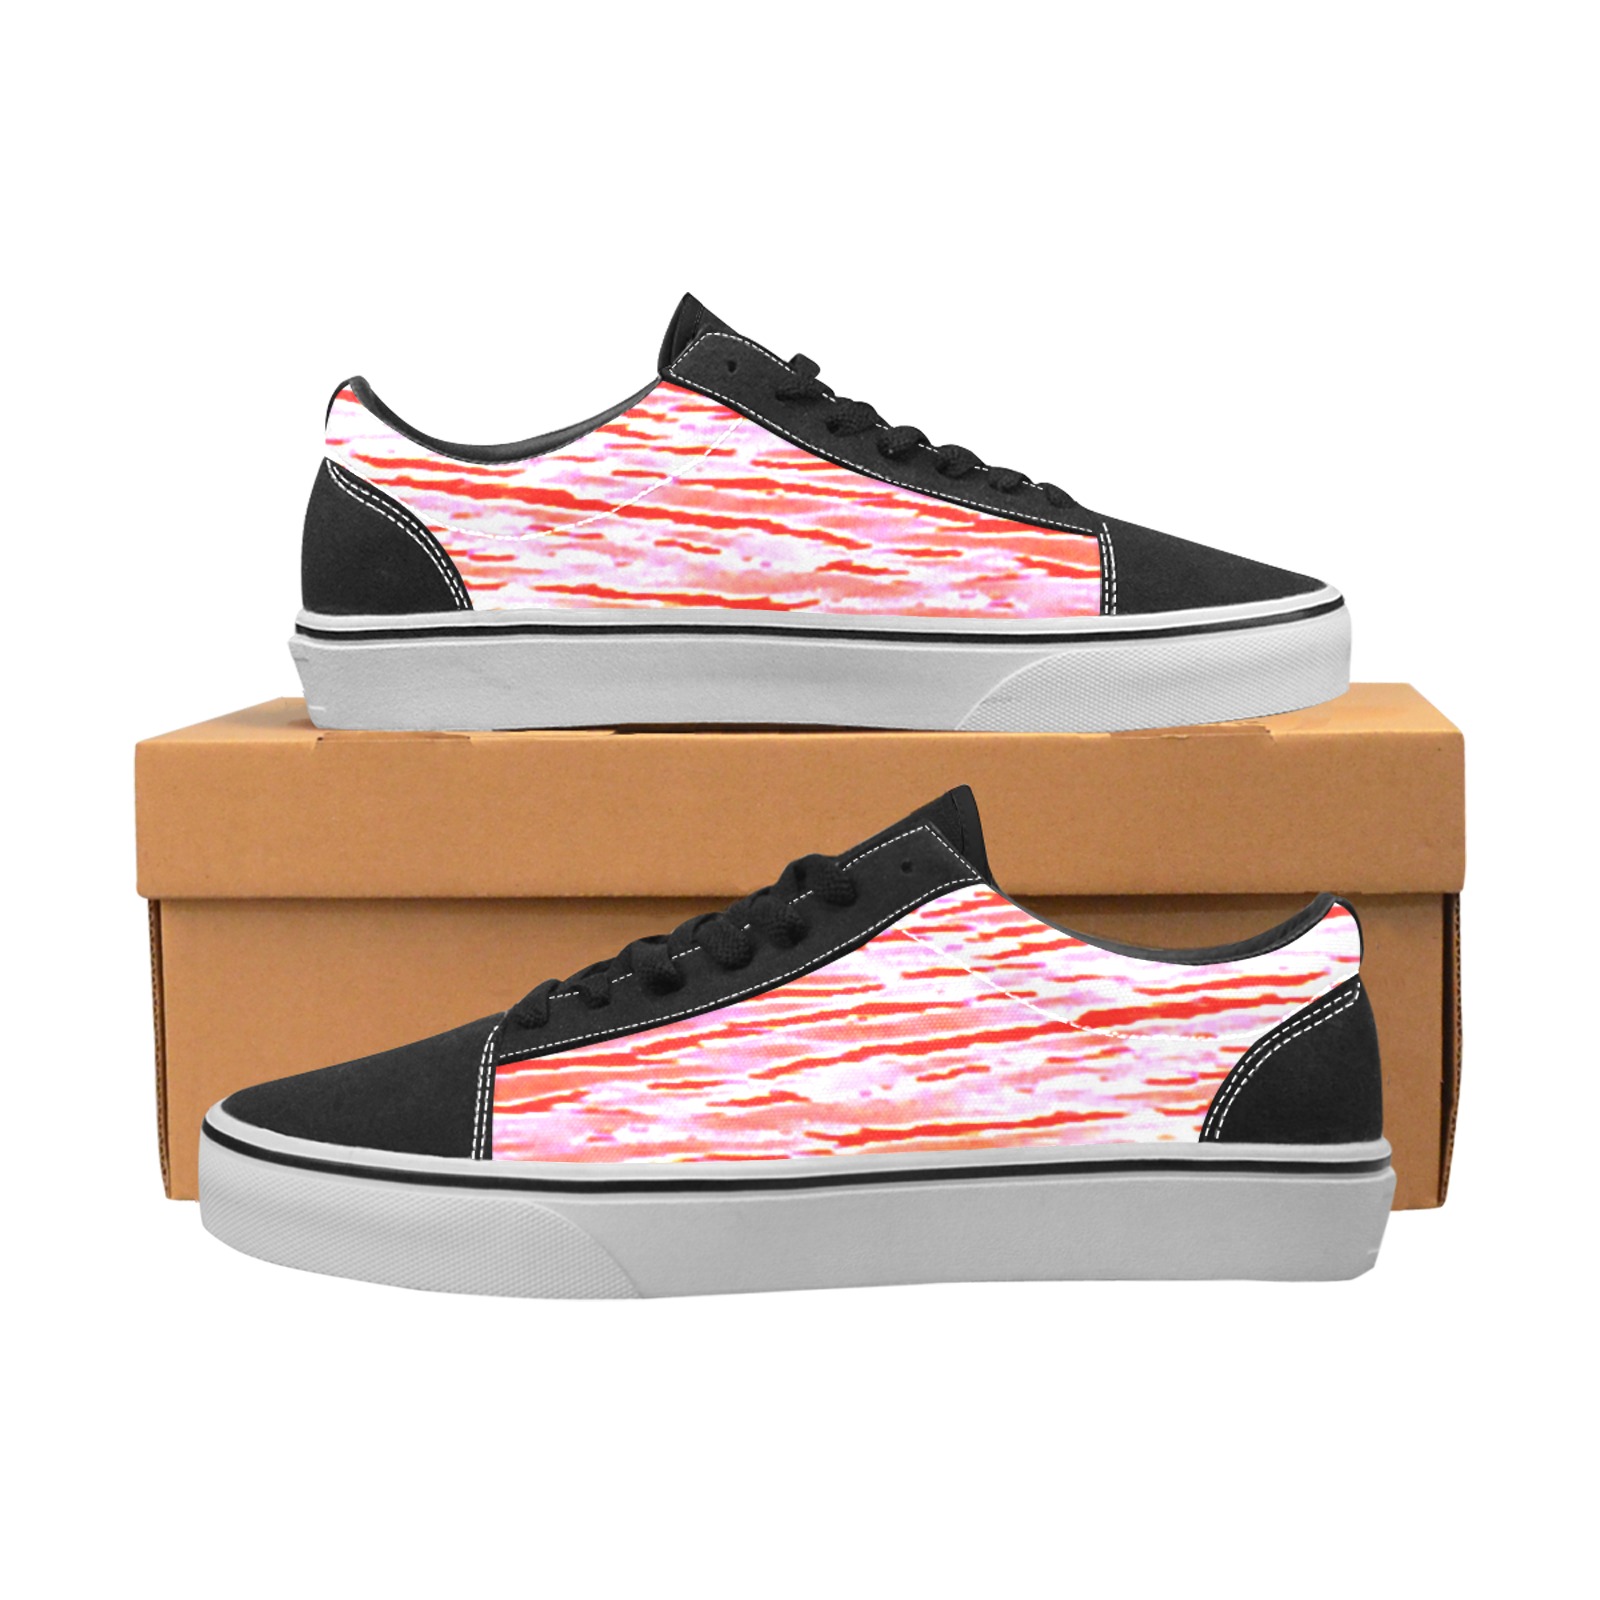 Orange and red water Women's Low Top Skateboarding Shoes (Model E001-2)